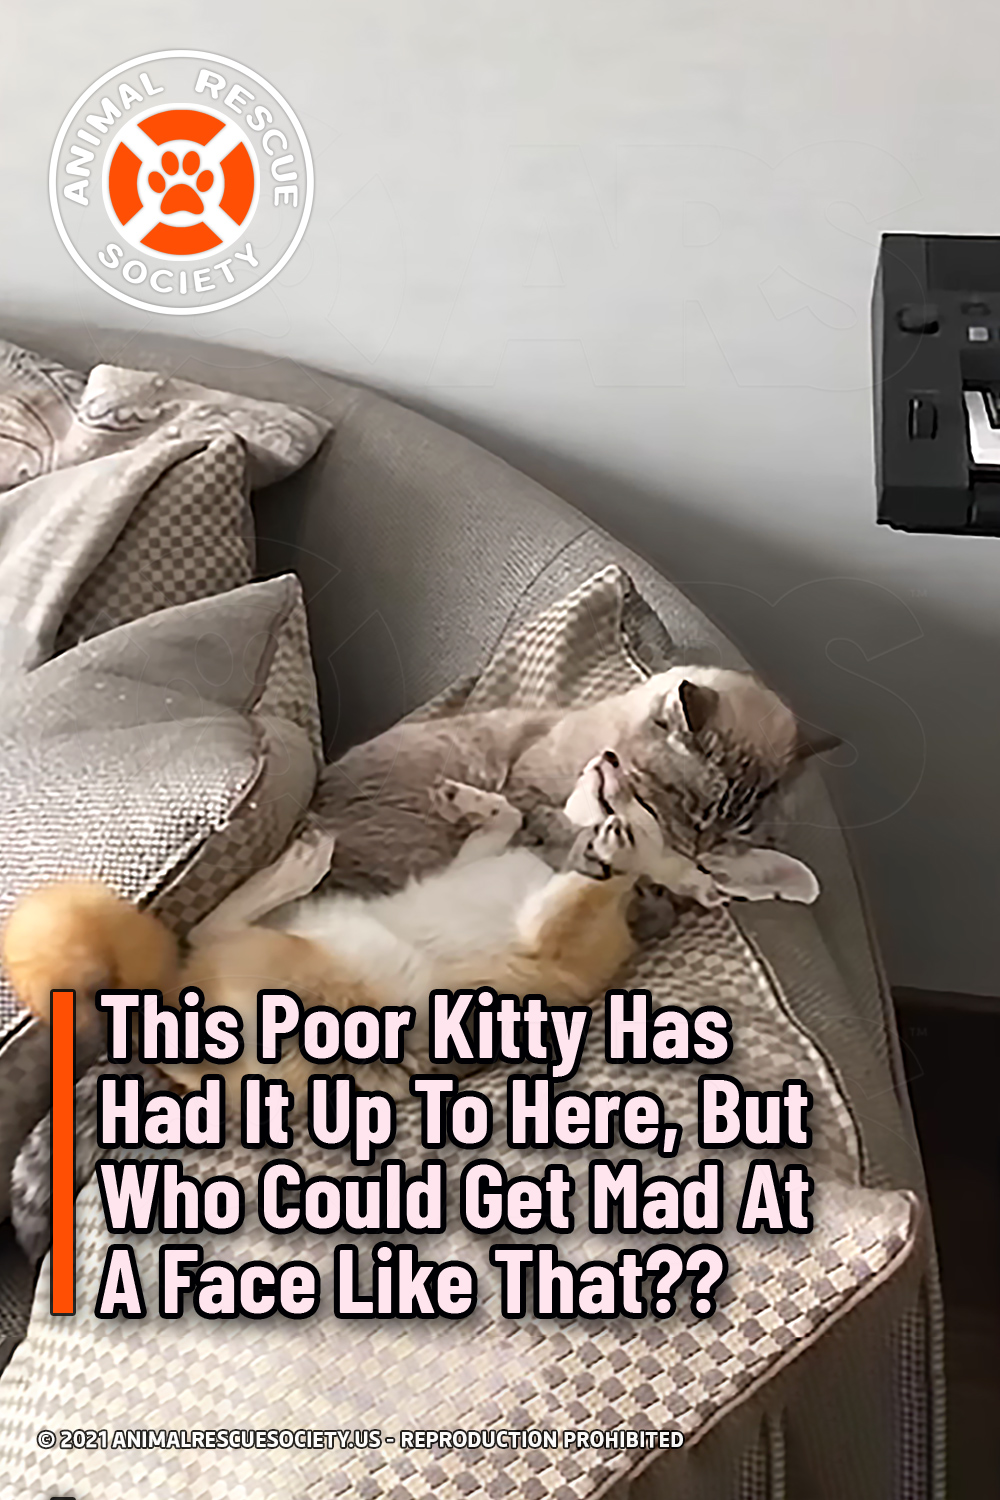 This Poor Kitty Has Had It Up To Here, But Who Could Get Mad At A Face Like That??